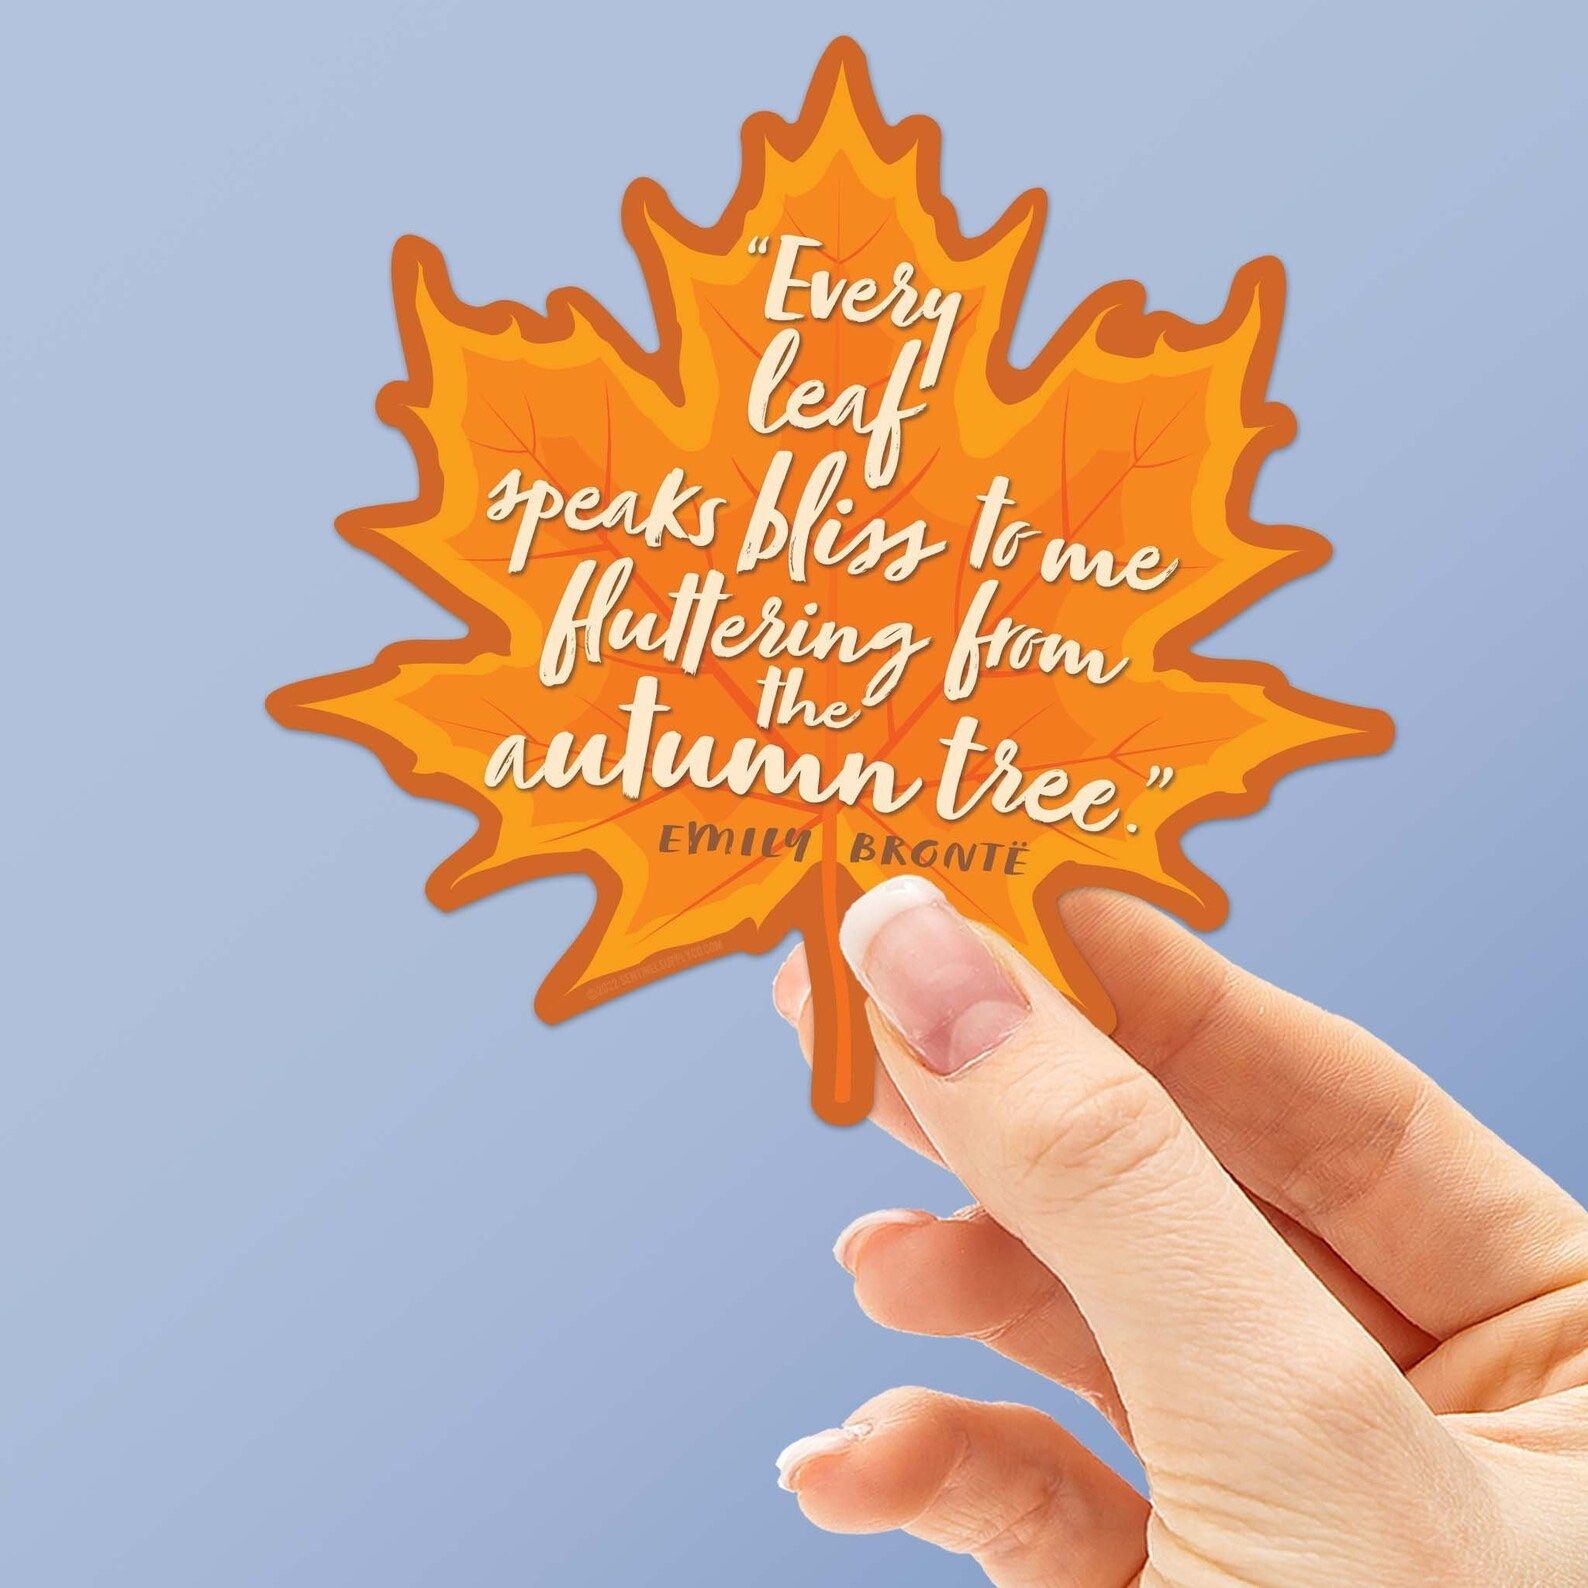 leaf-shaped sticker with emily bronte quote "every leaf speaks bliss to me fluttering from the autumn tree"